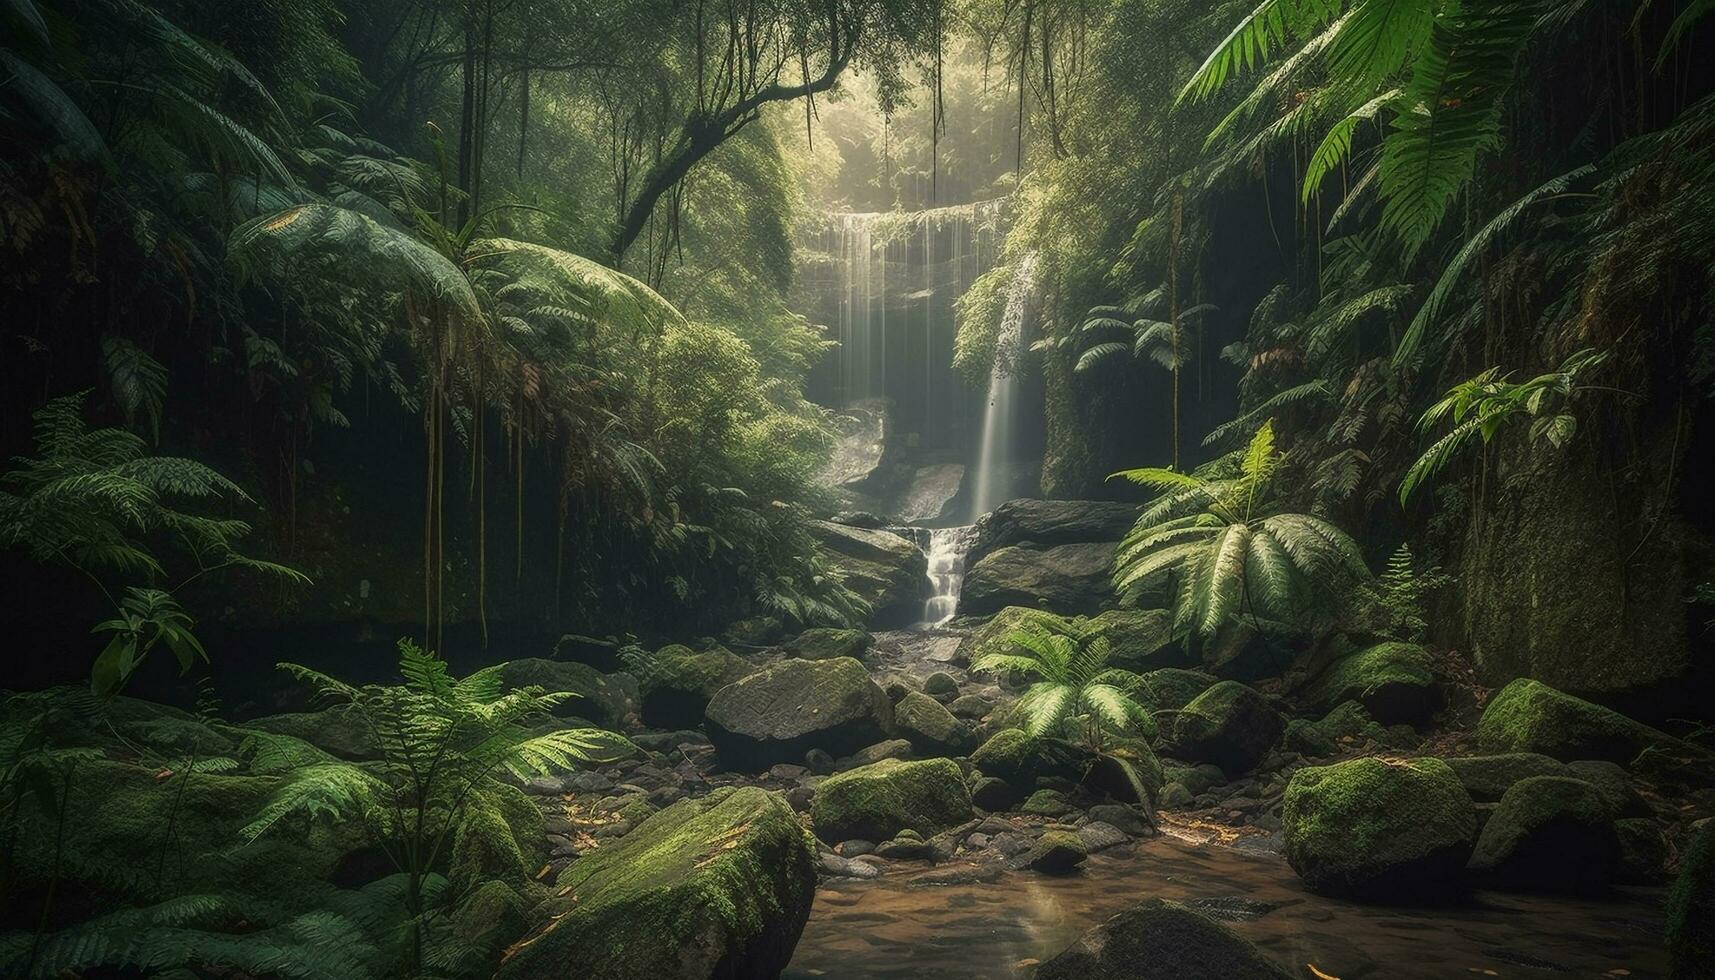 Tranquil scene Freshness of green color, falling water, and mystery generated by AI photo